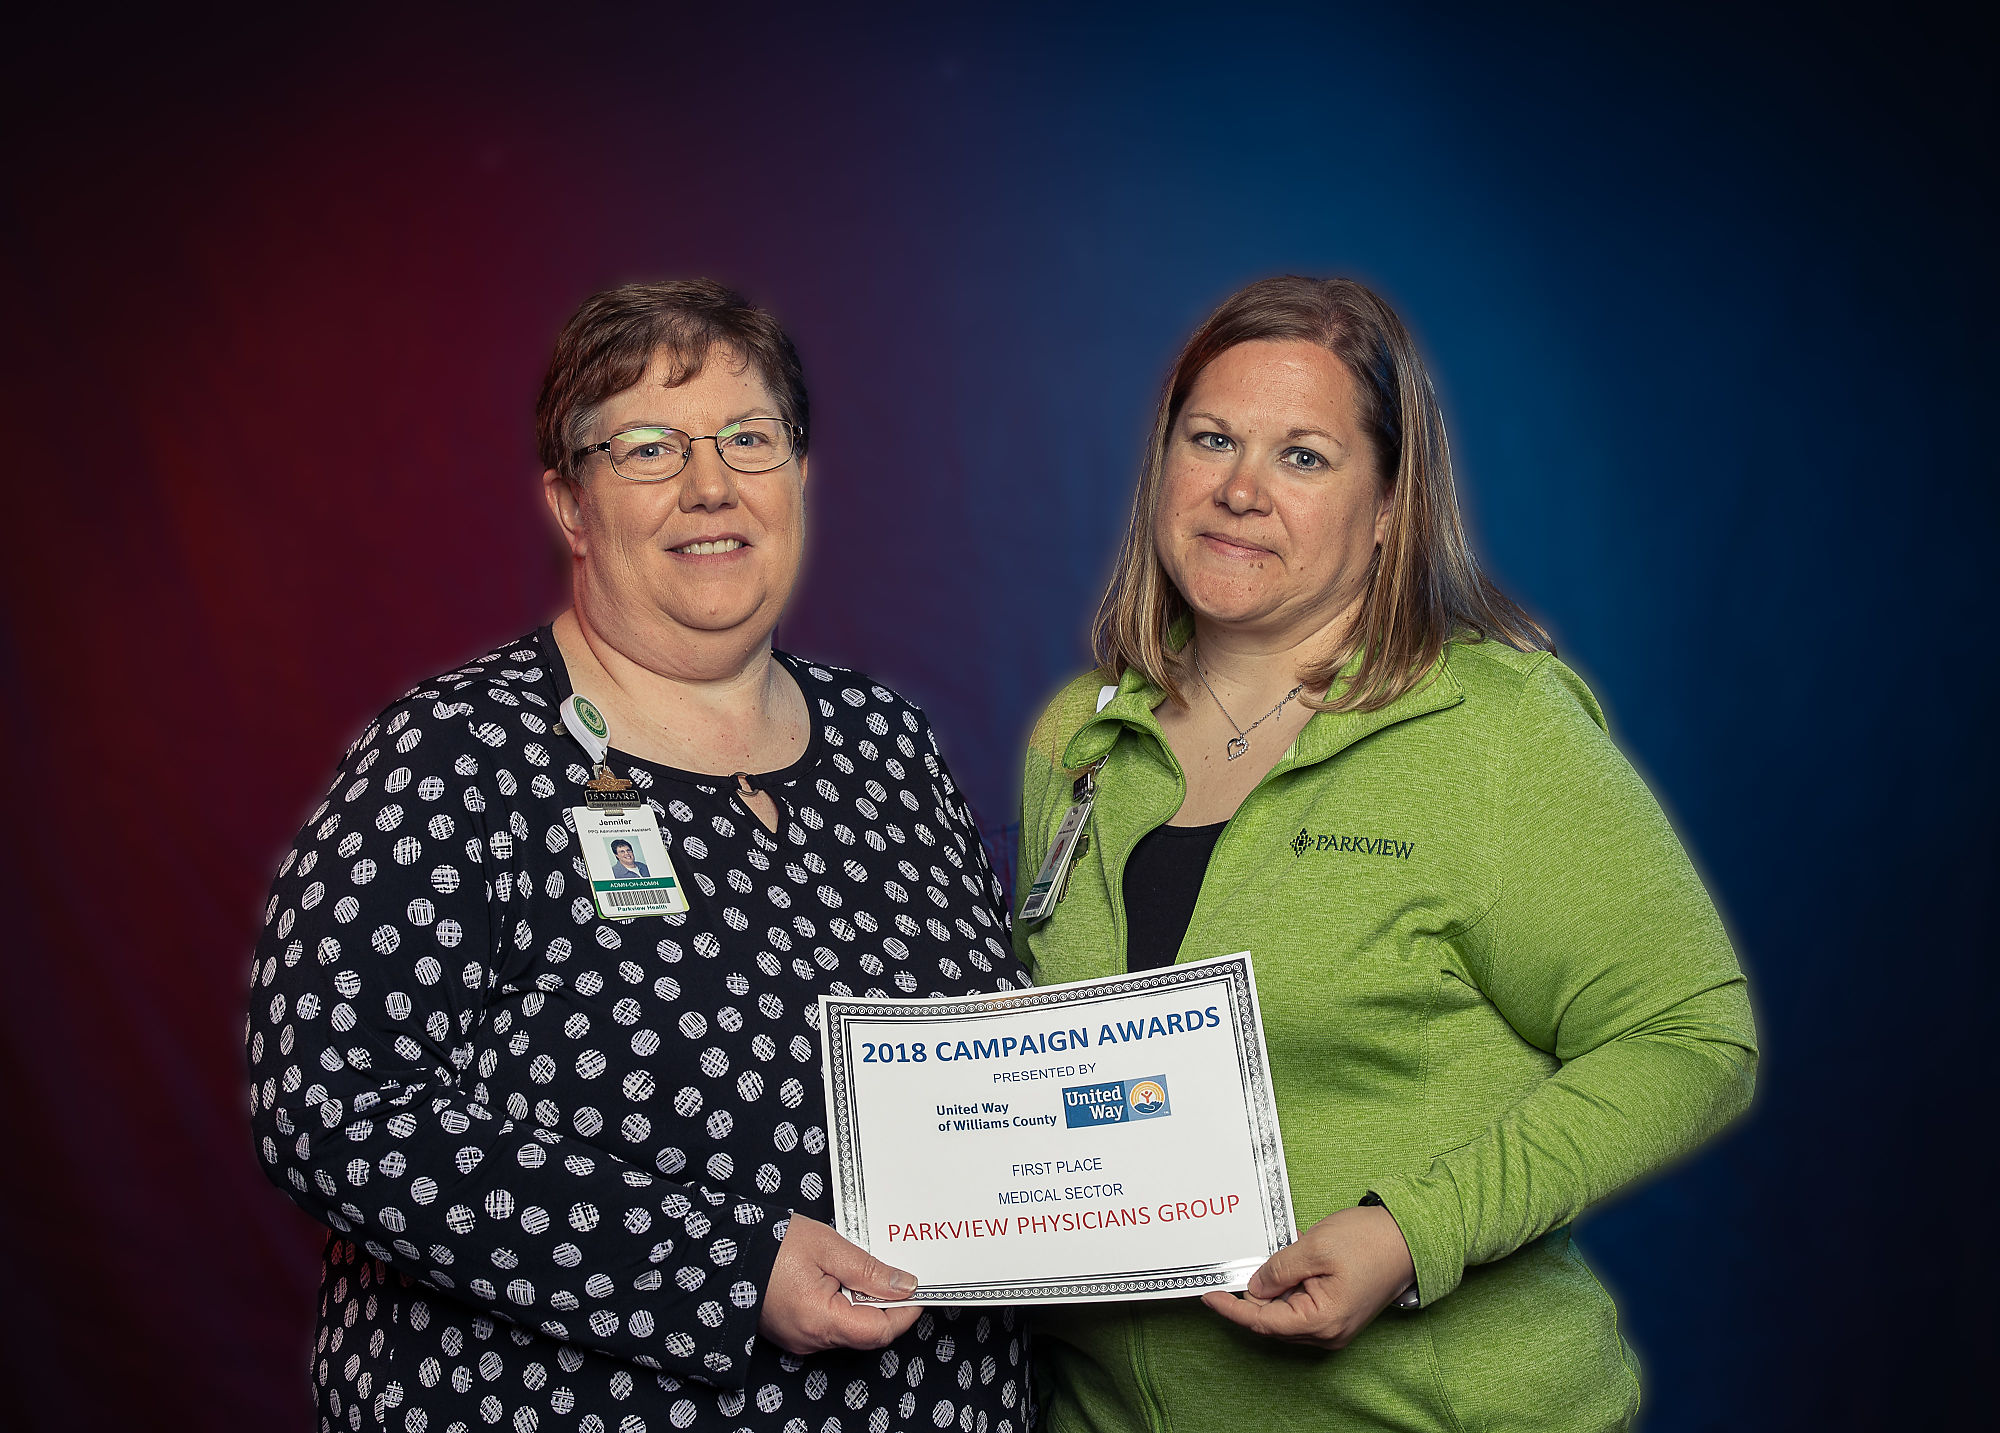 MEDICAL SECTOR 1st Place - Jennifer Headley & Holly Geren for Parkview Physicians Group